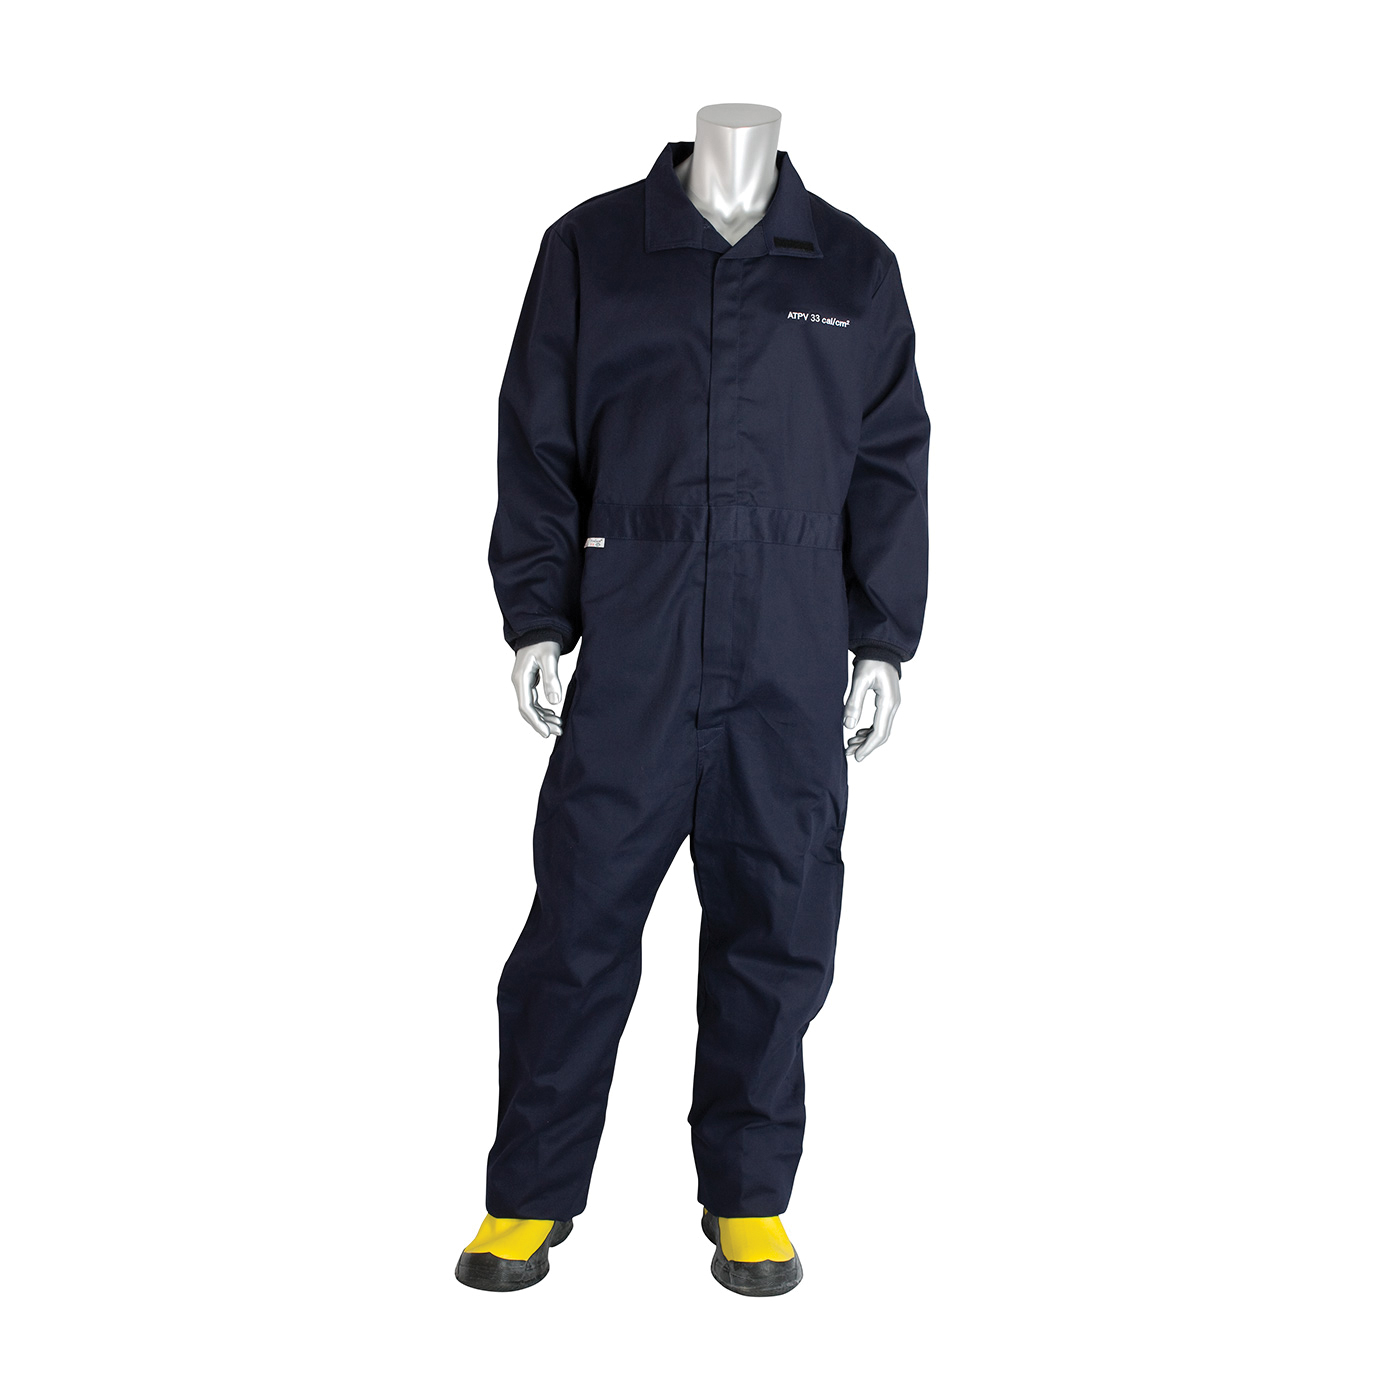 PIP® 9100-52758/2XL Flame Resistant Coverall, 2XL, Navy, 88% Cotton/12% Nylon, 52 to 54 in Chest, 32 in L Inseam